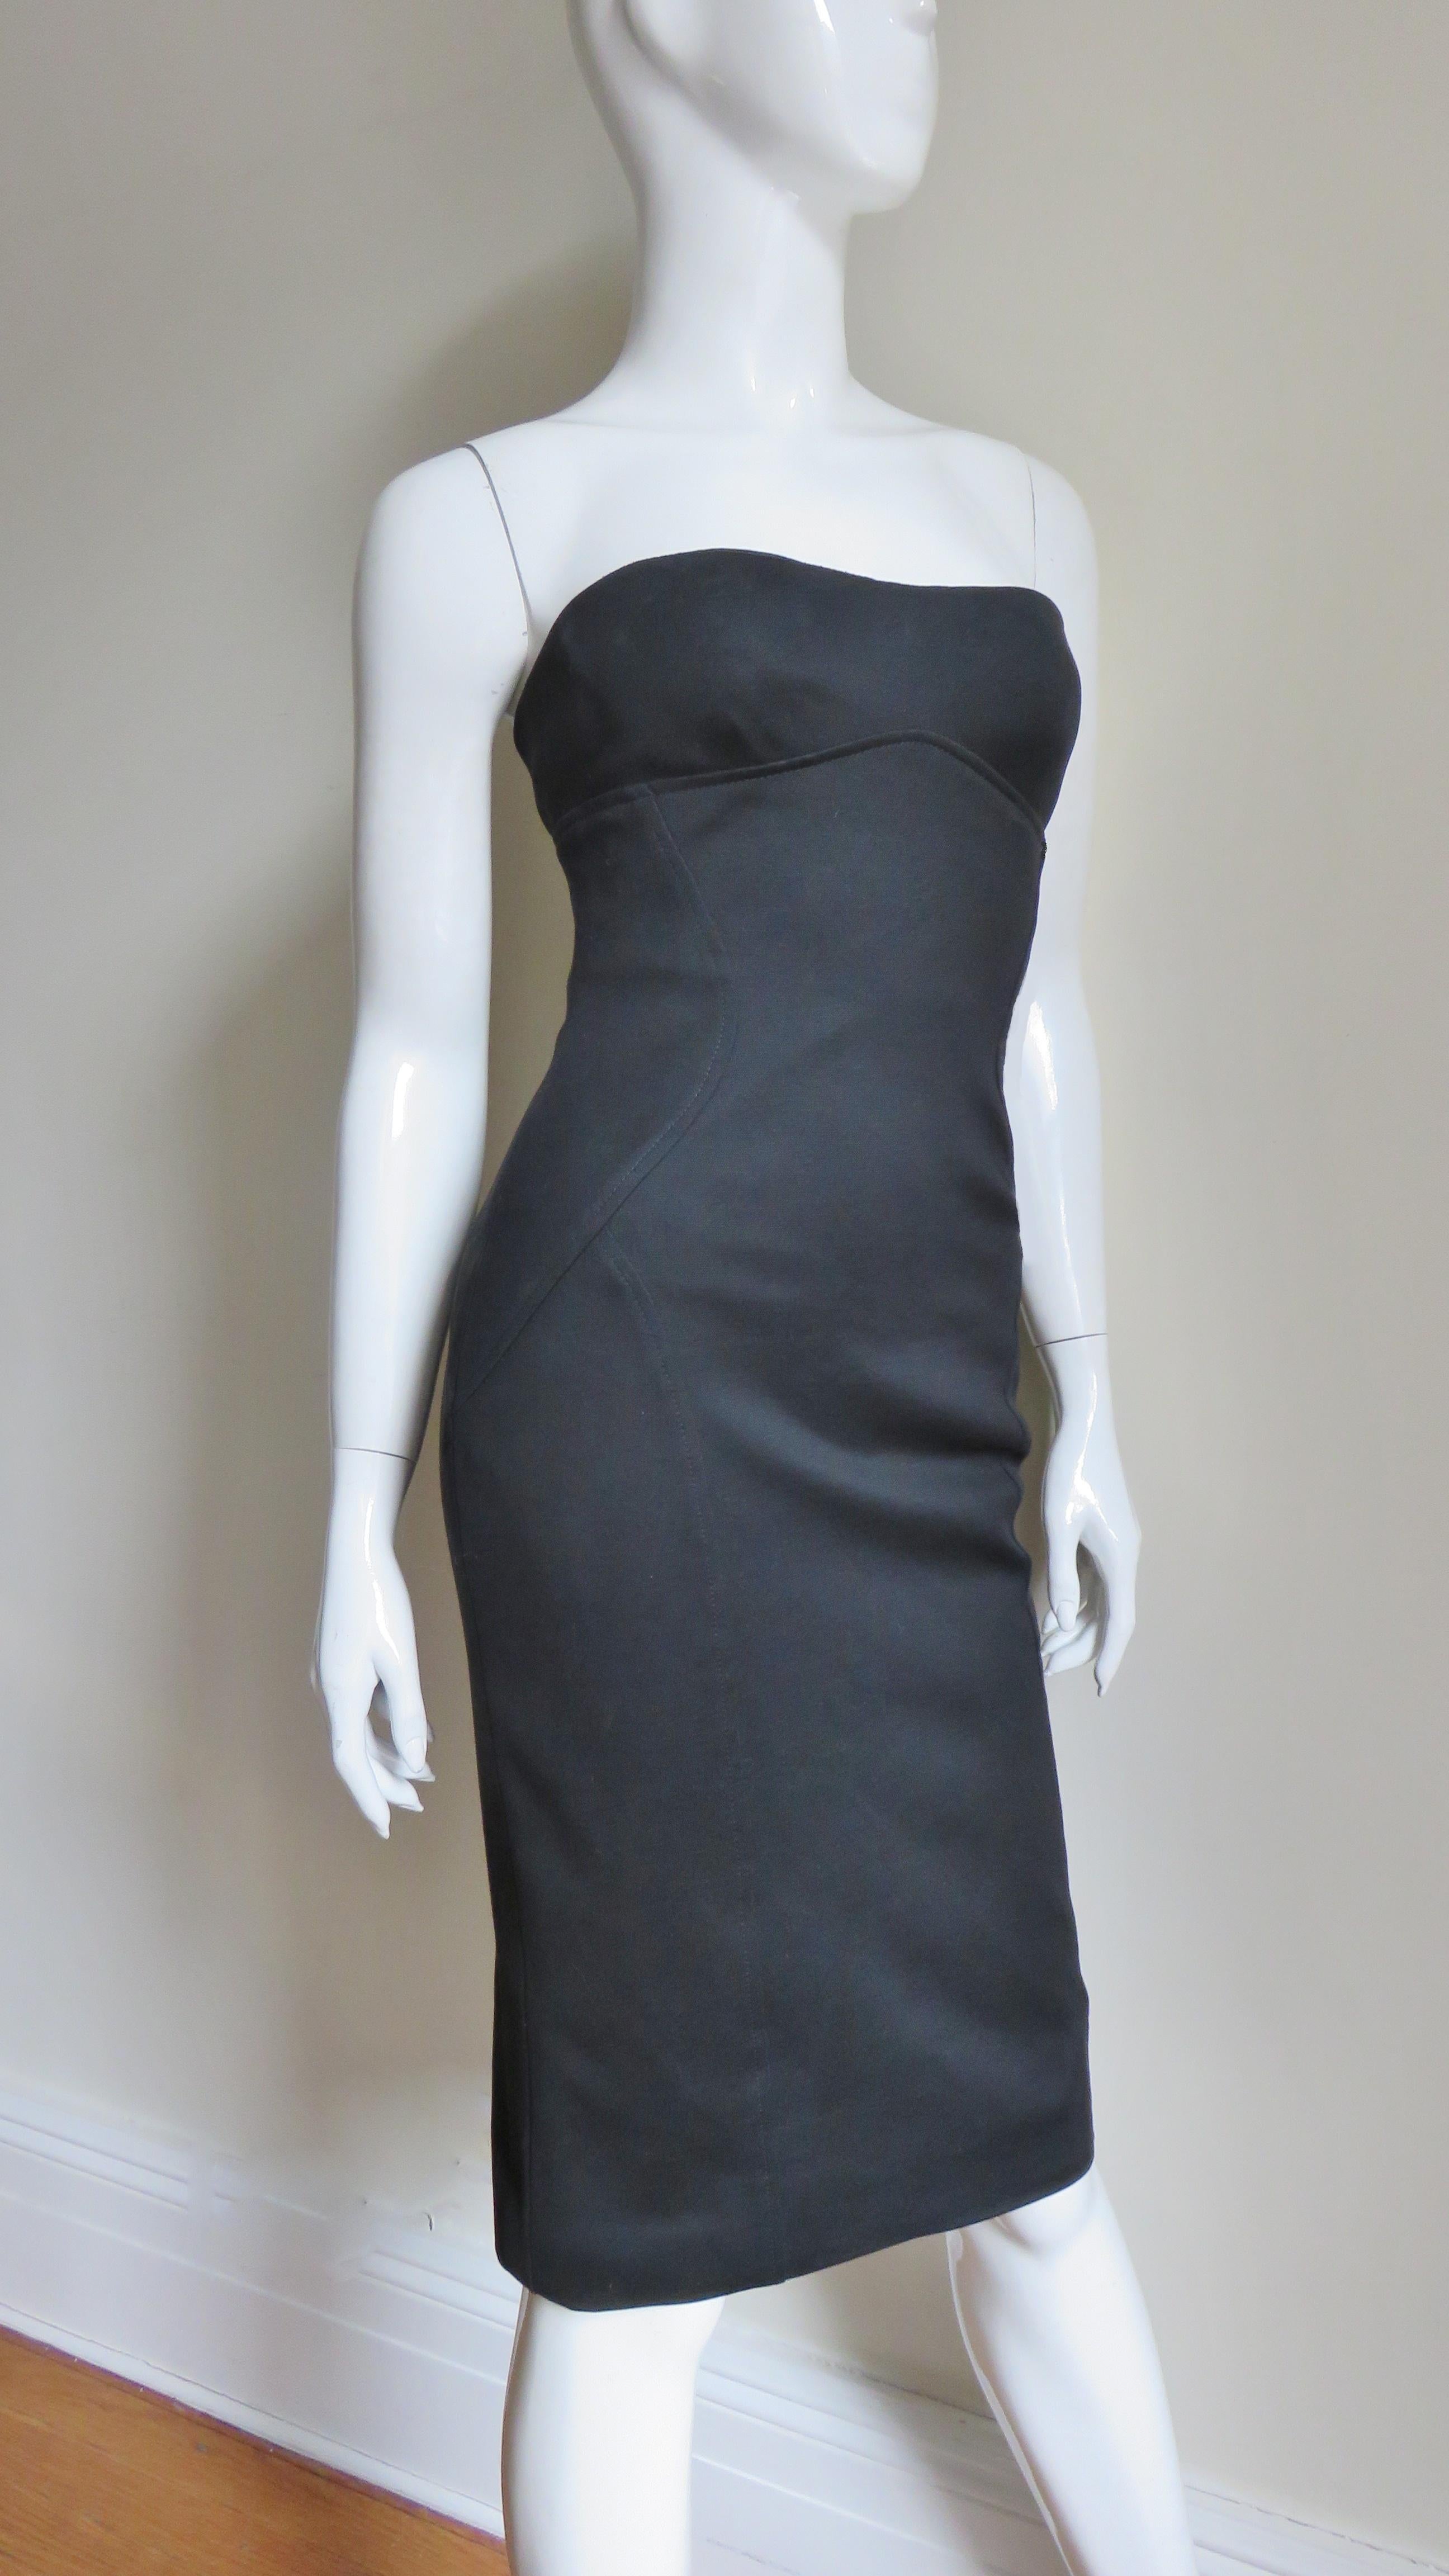 Black Gianni Versace New Strapless Lace Up Dress For Sale